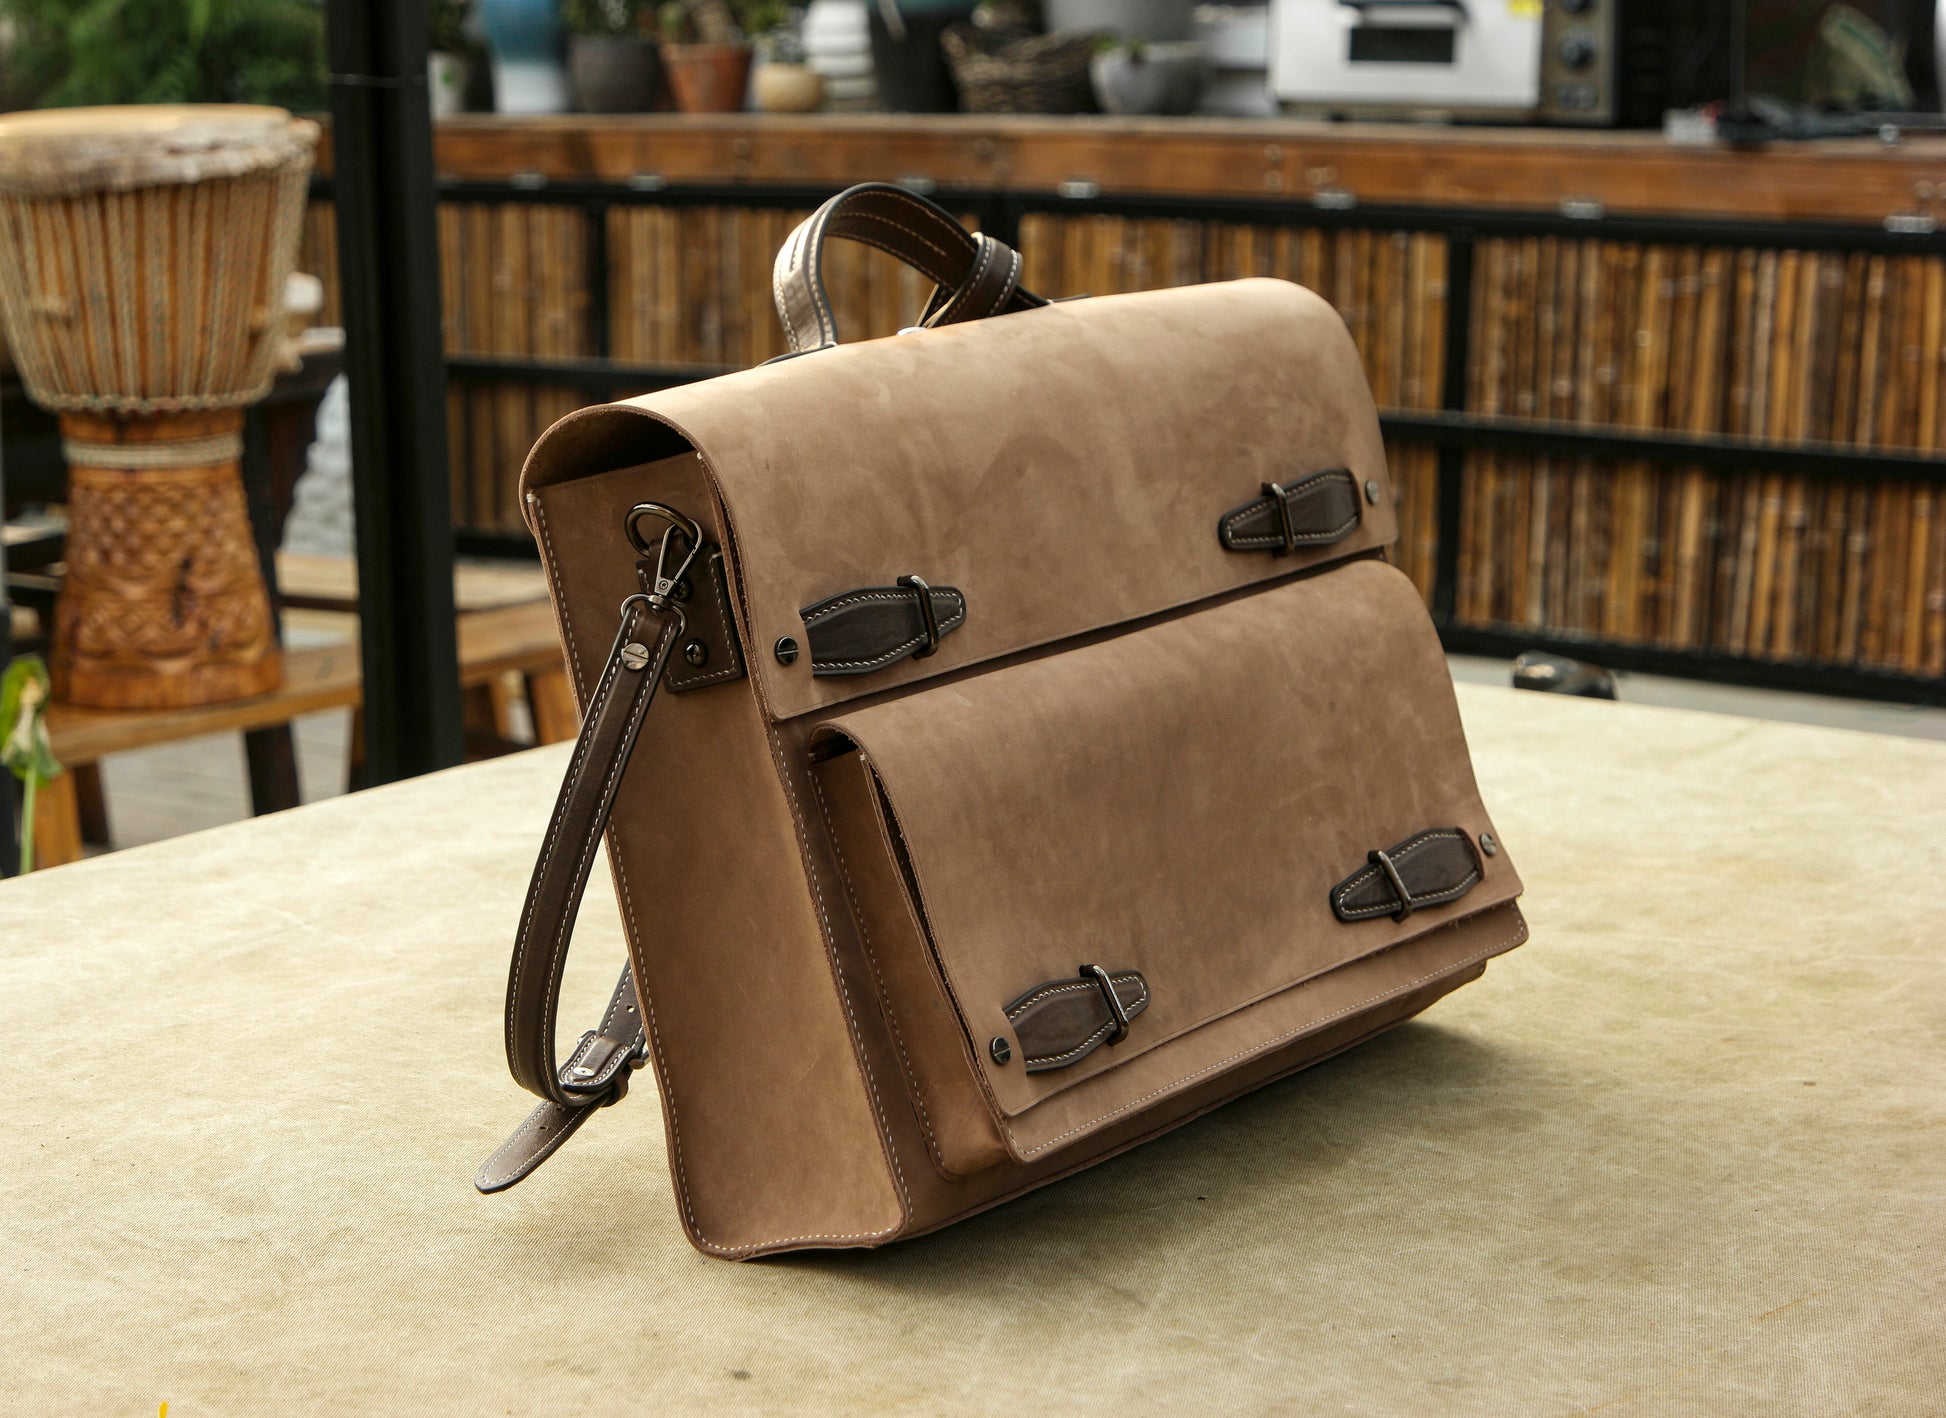 【Physical Pattern】Vegetable tanned leather backpack/Leather knapsack made by copying Russian handmade knapsack pattern